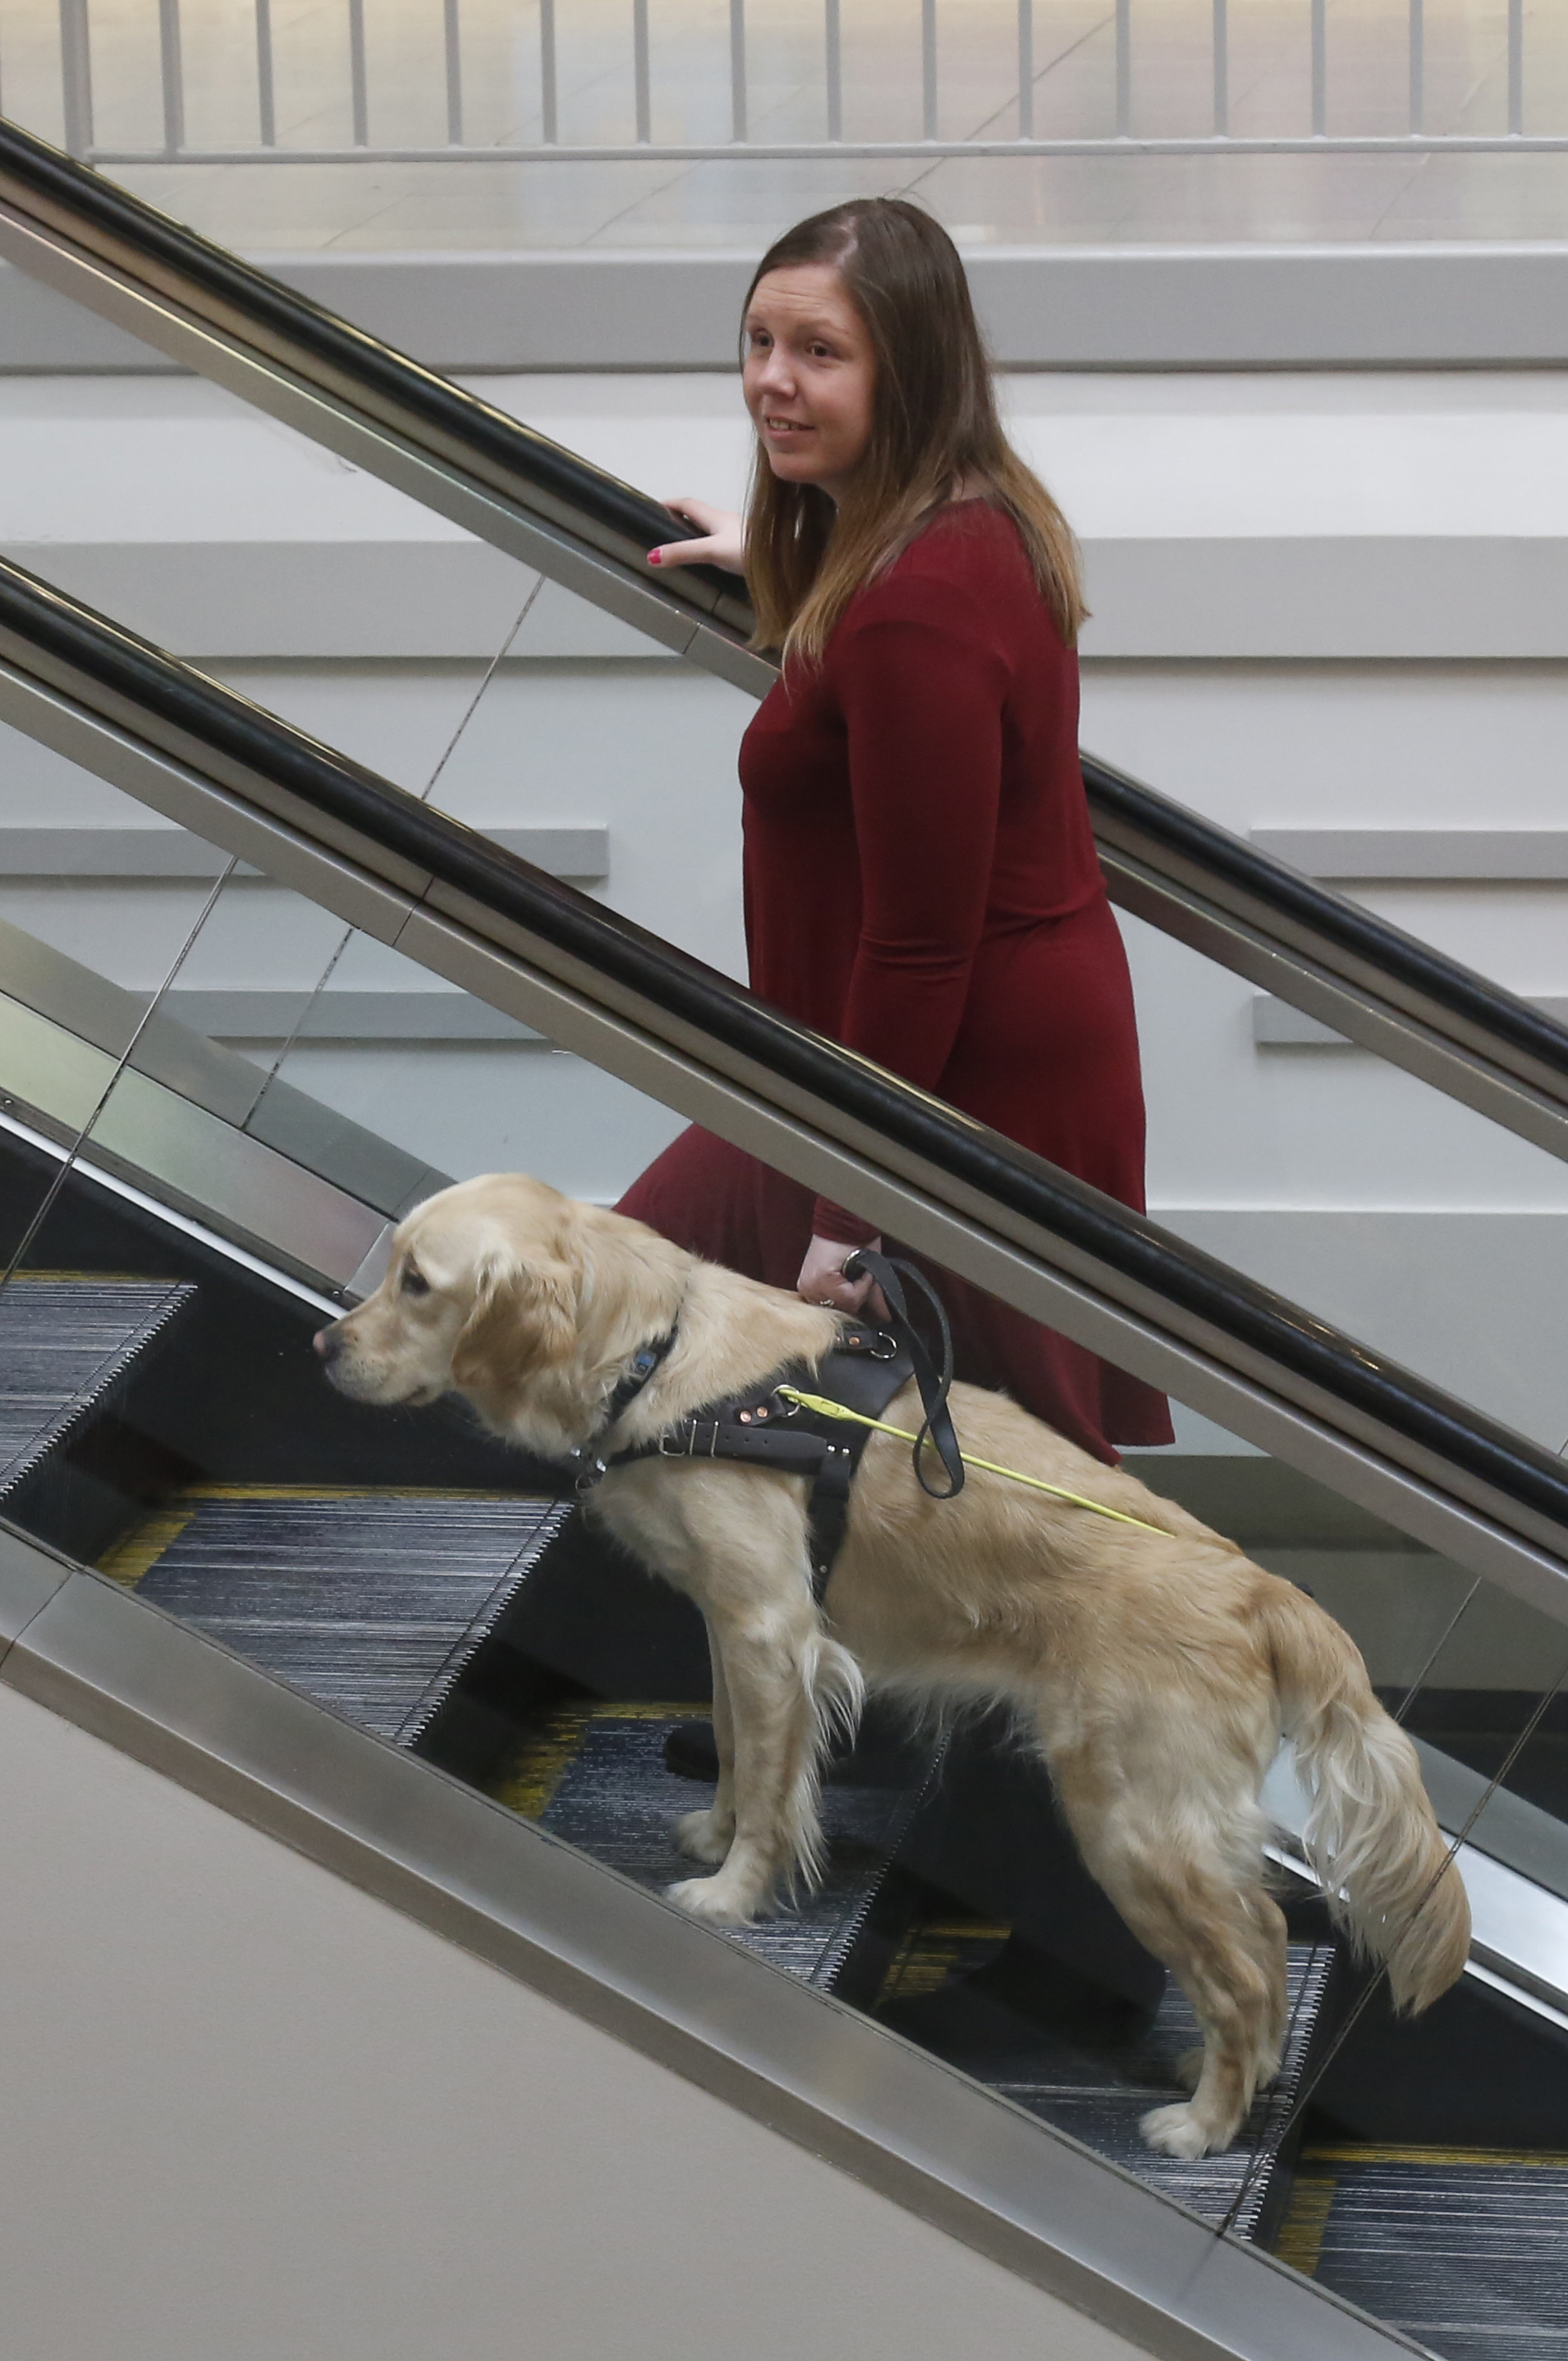 A woman and her guide dog going up a mall escalator; the guide dog is a golden retriever